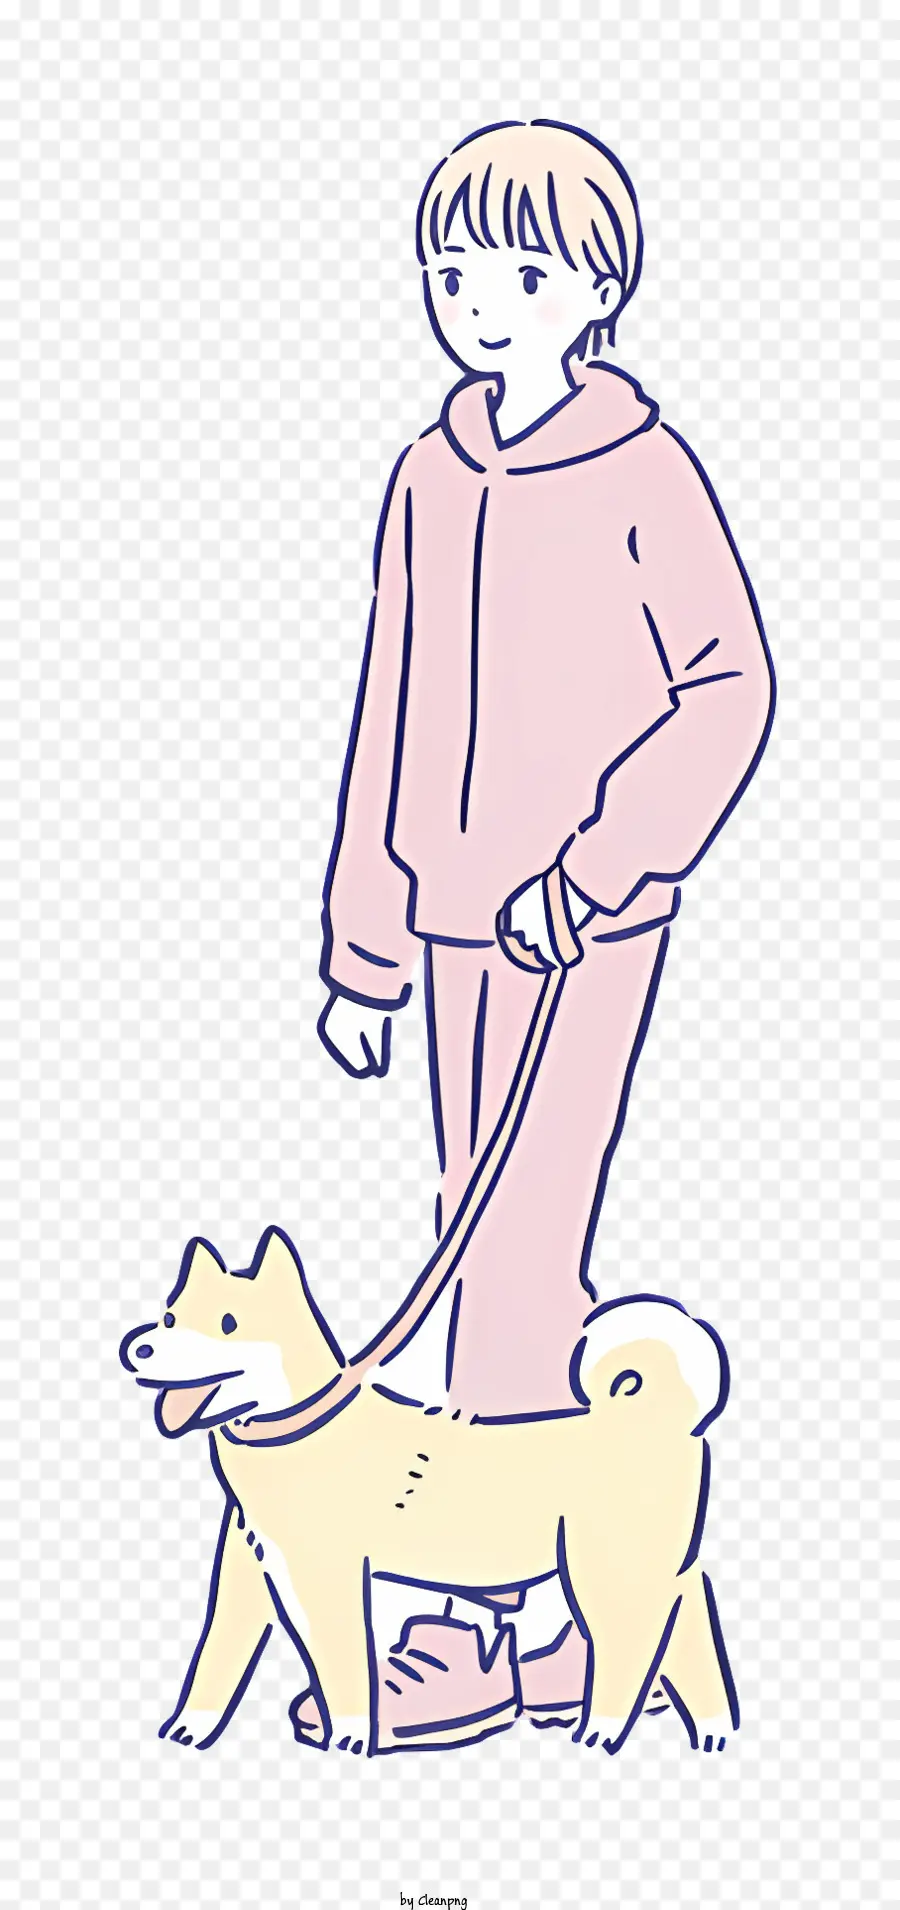 drawing young woman white and brown dog leash pink sweater